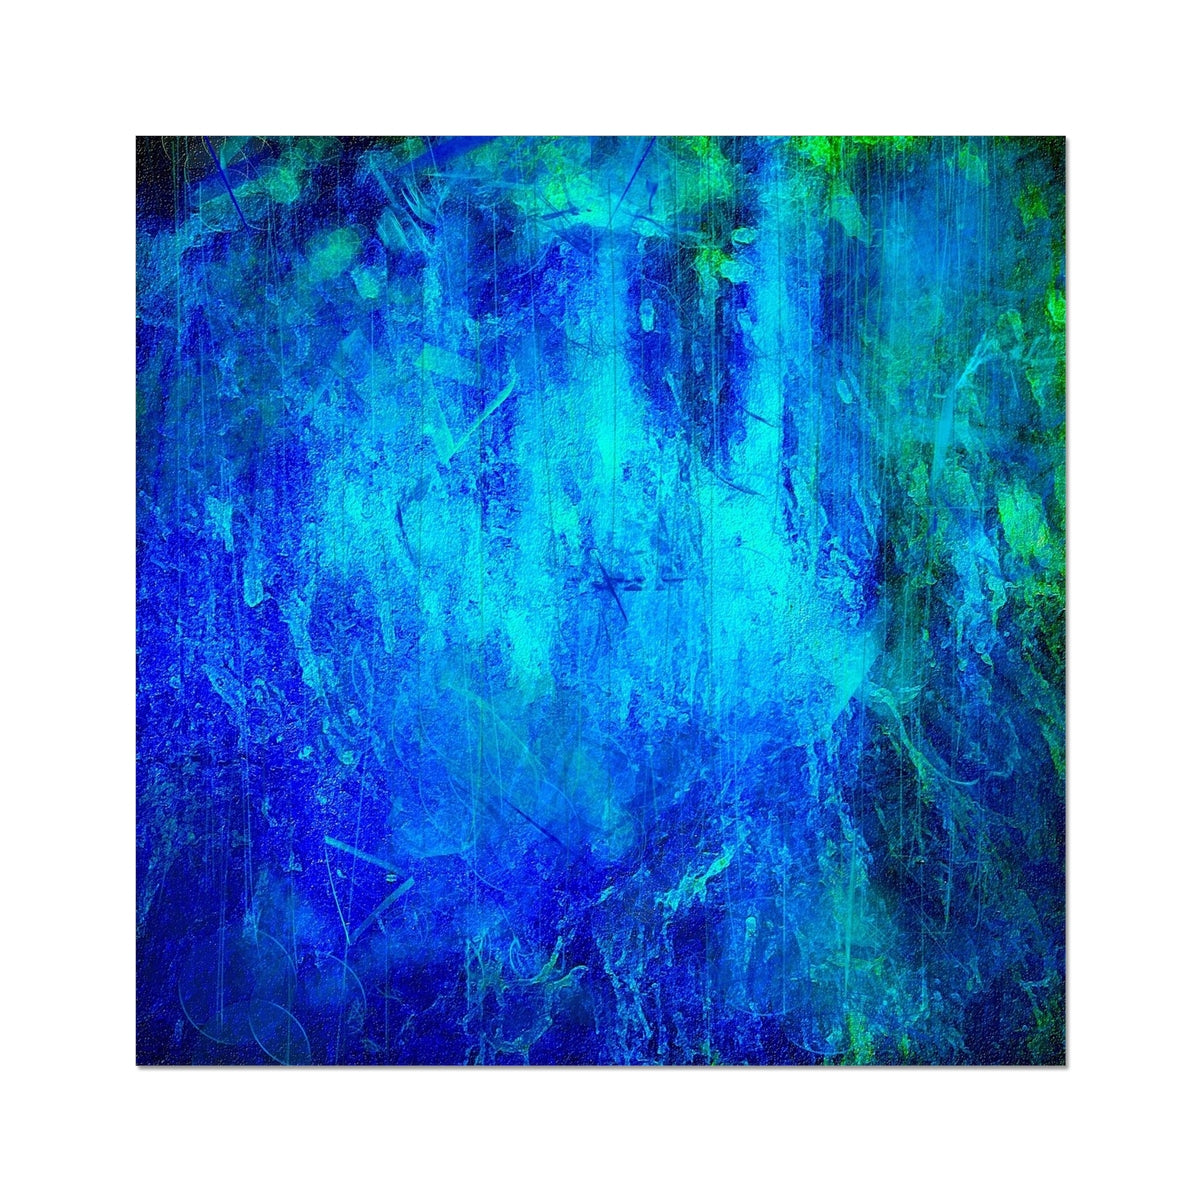 The Waterfall Abstract Painting | Artist Proof Collector Prints From Scotland-Artist Proof Collector Prints-Abstract & Impressionistic Art Gallery-20"x20"-Paintings, Prints, Homeware, Art Gifts From Scotland By Scottish Artist Kevin Hunter